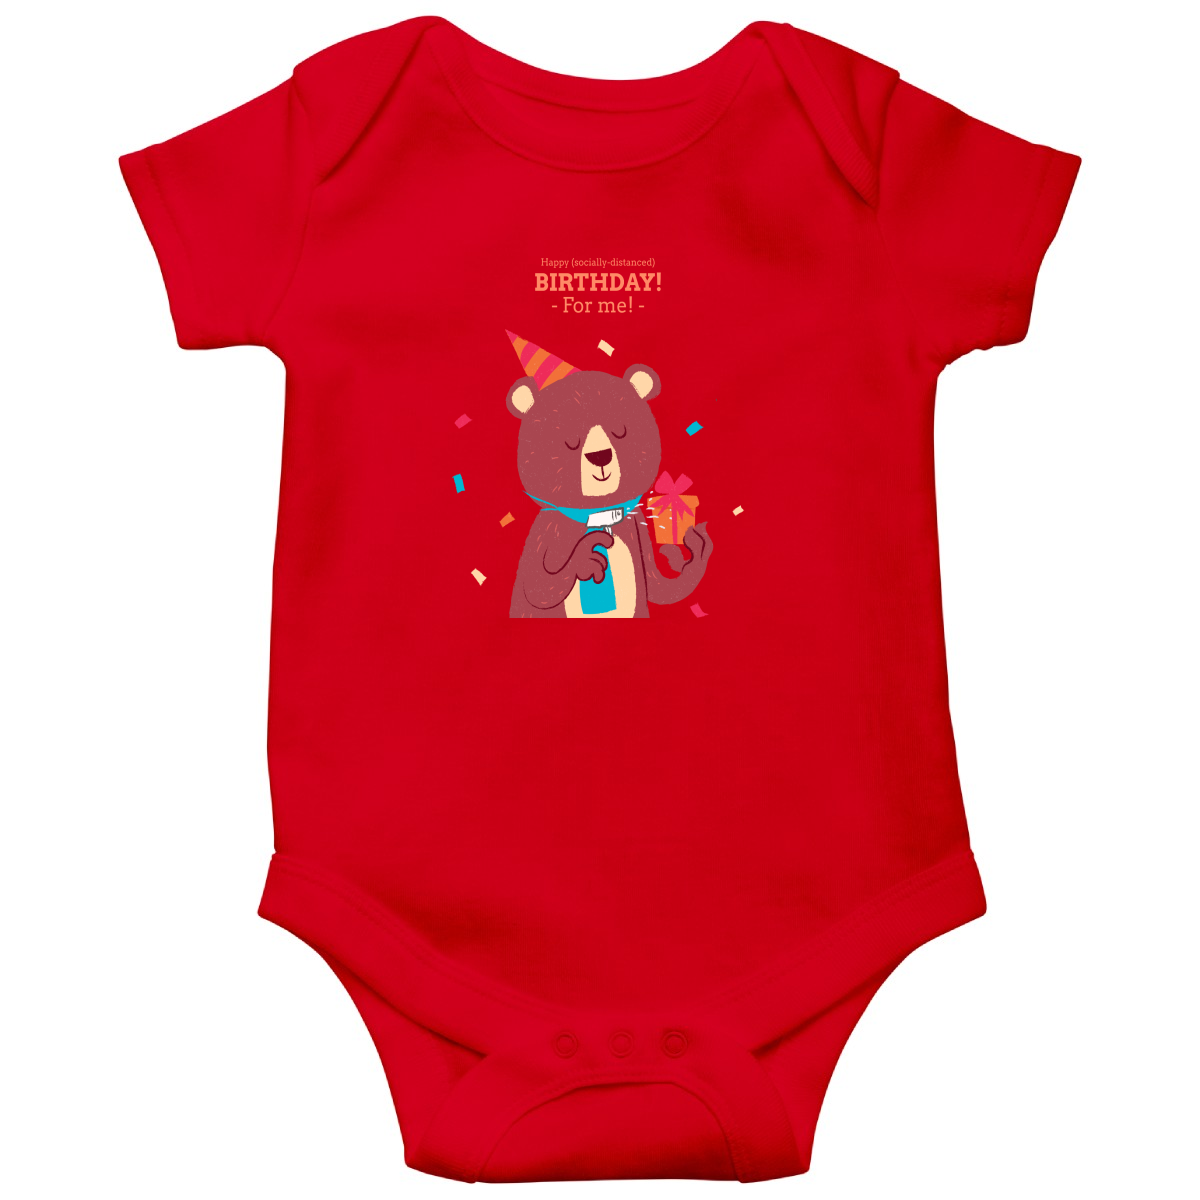 Happy (social distanced) birthday for me  Baby Bodysuits | Red